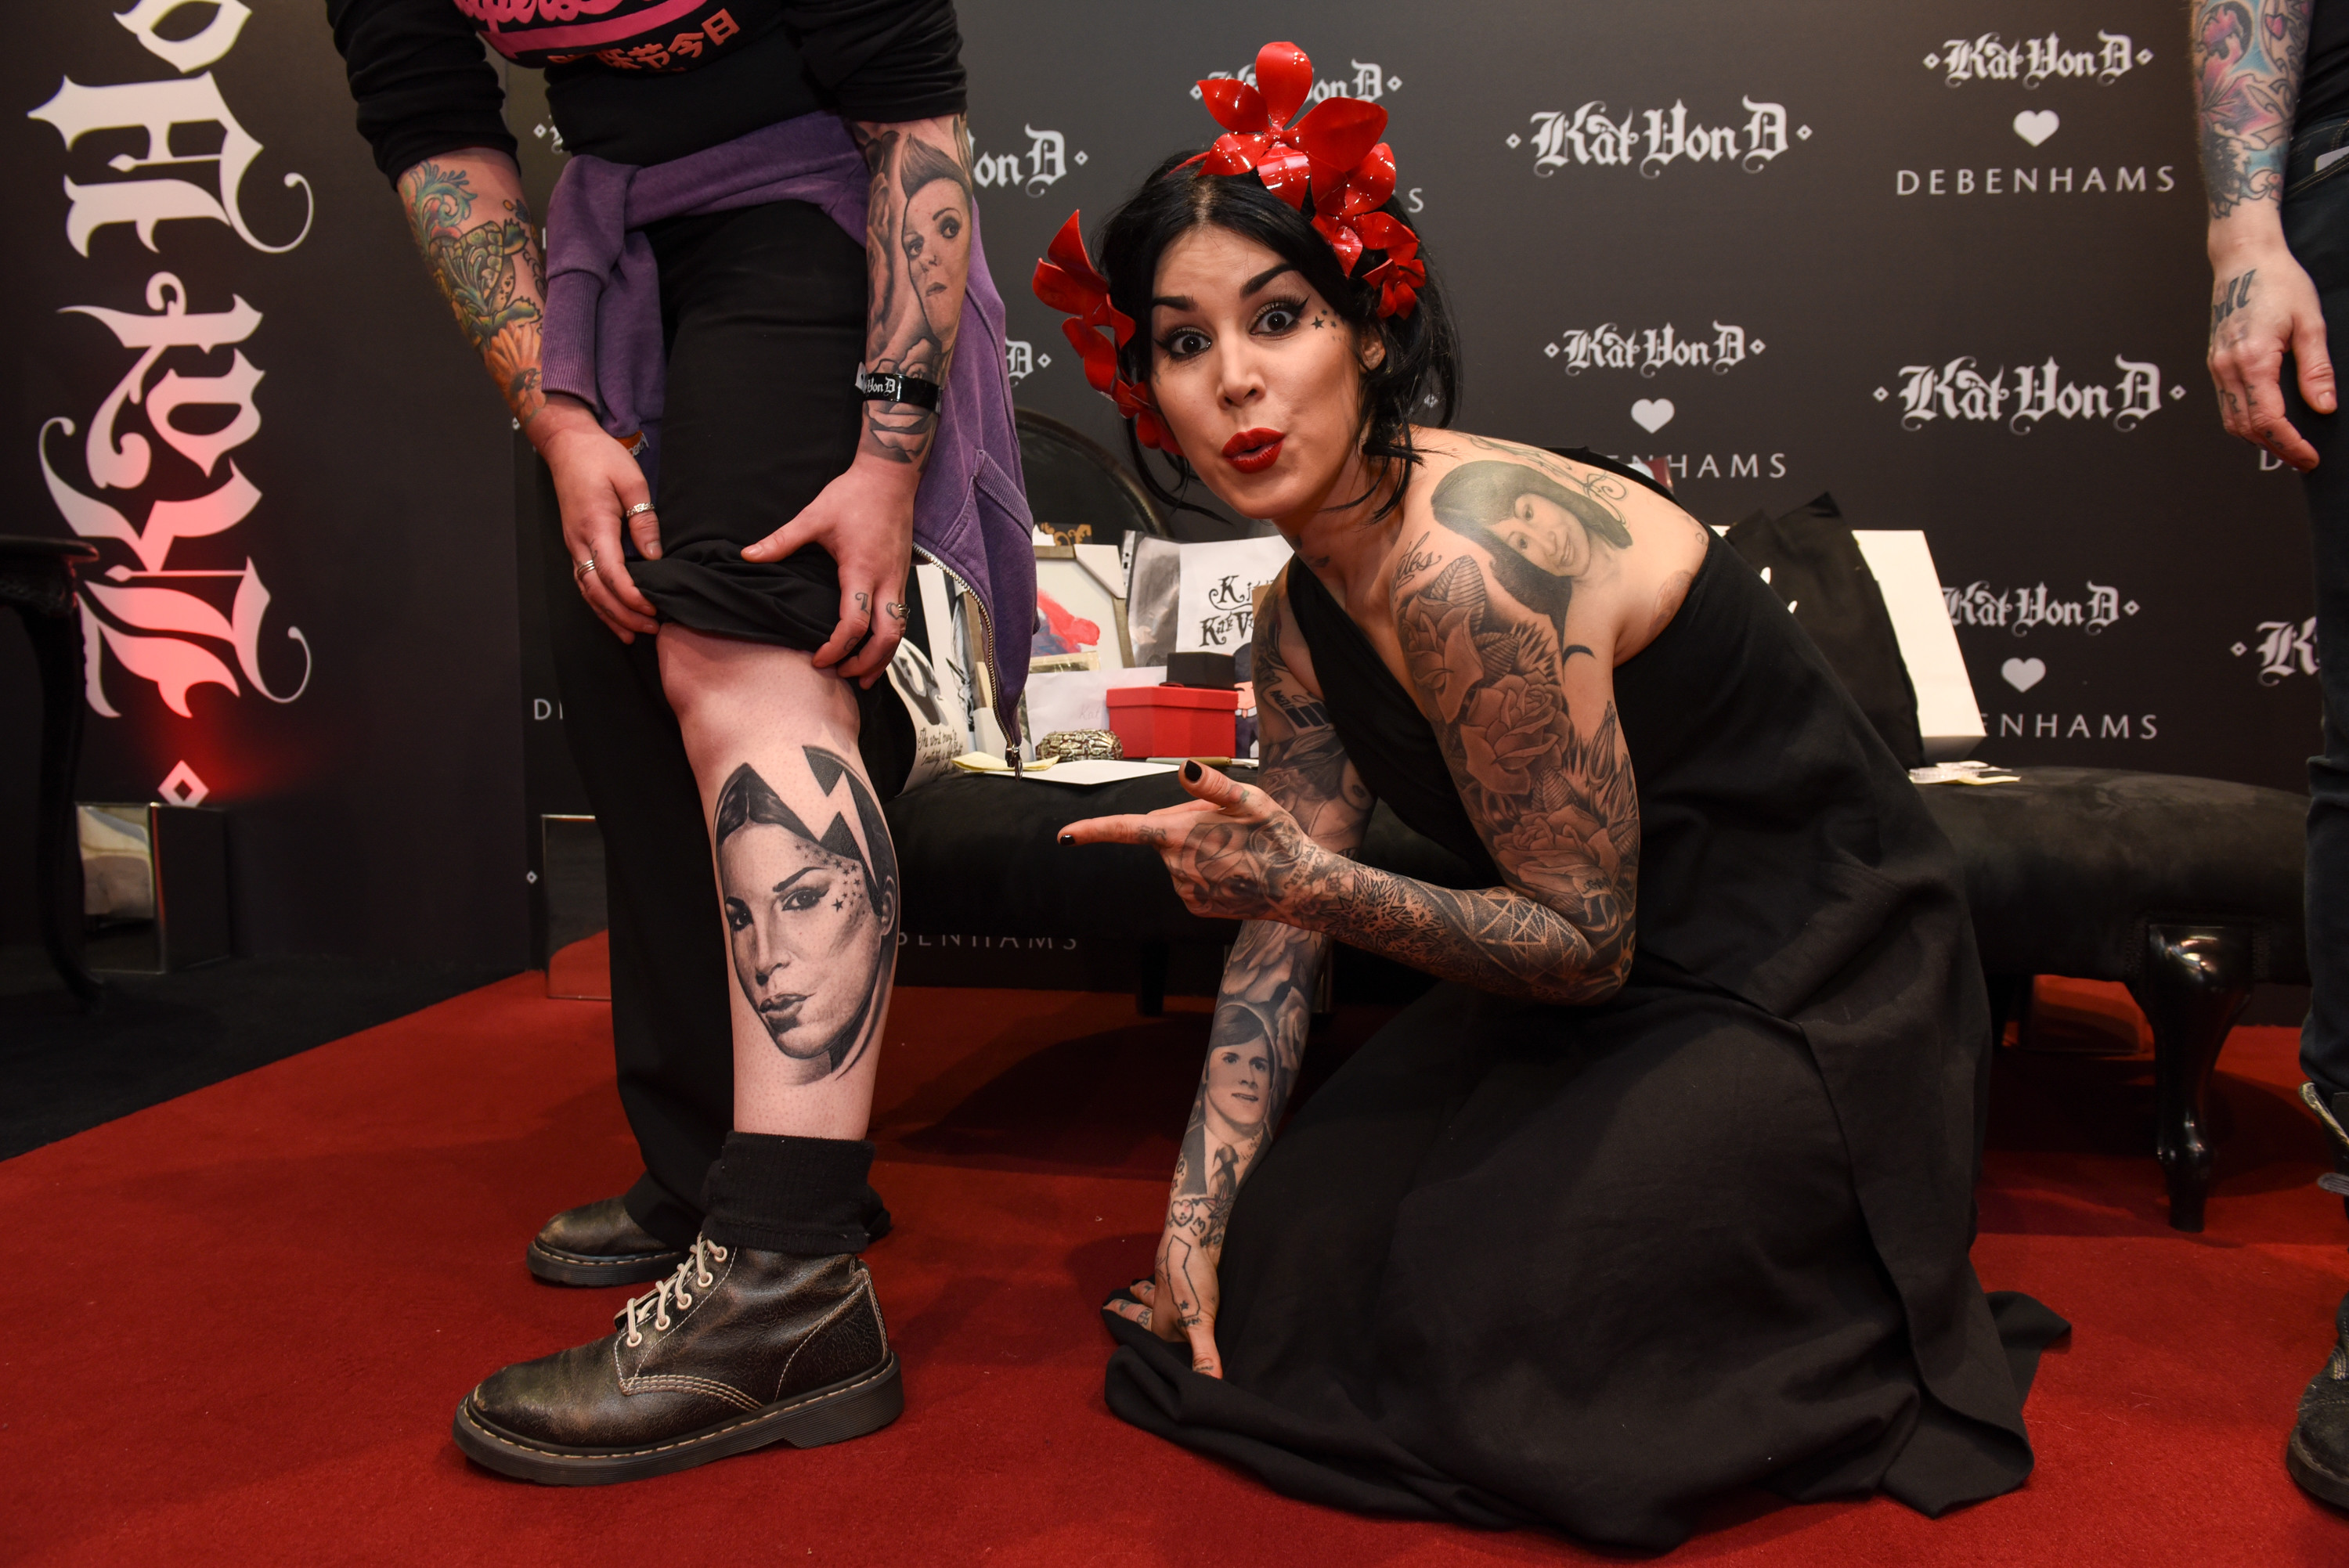 3000x2003 A guest at the UK launch of Kat Von D Beauty at Debenhams shows off his